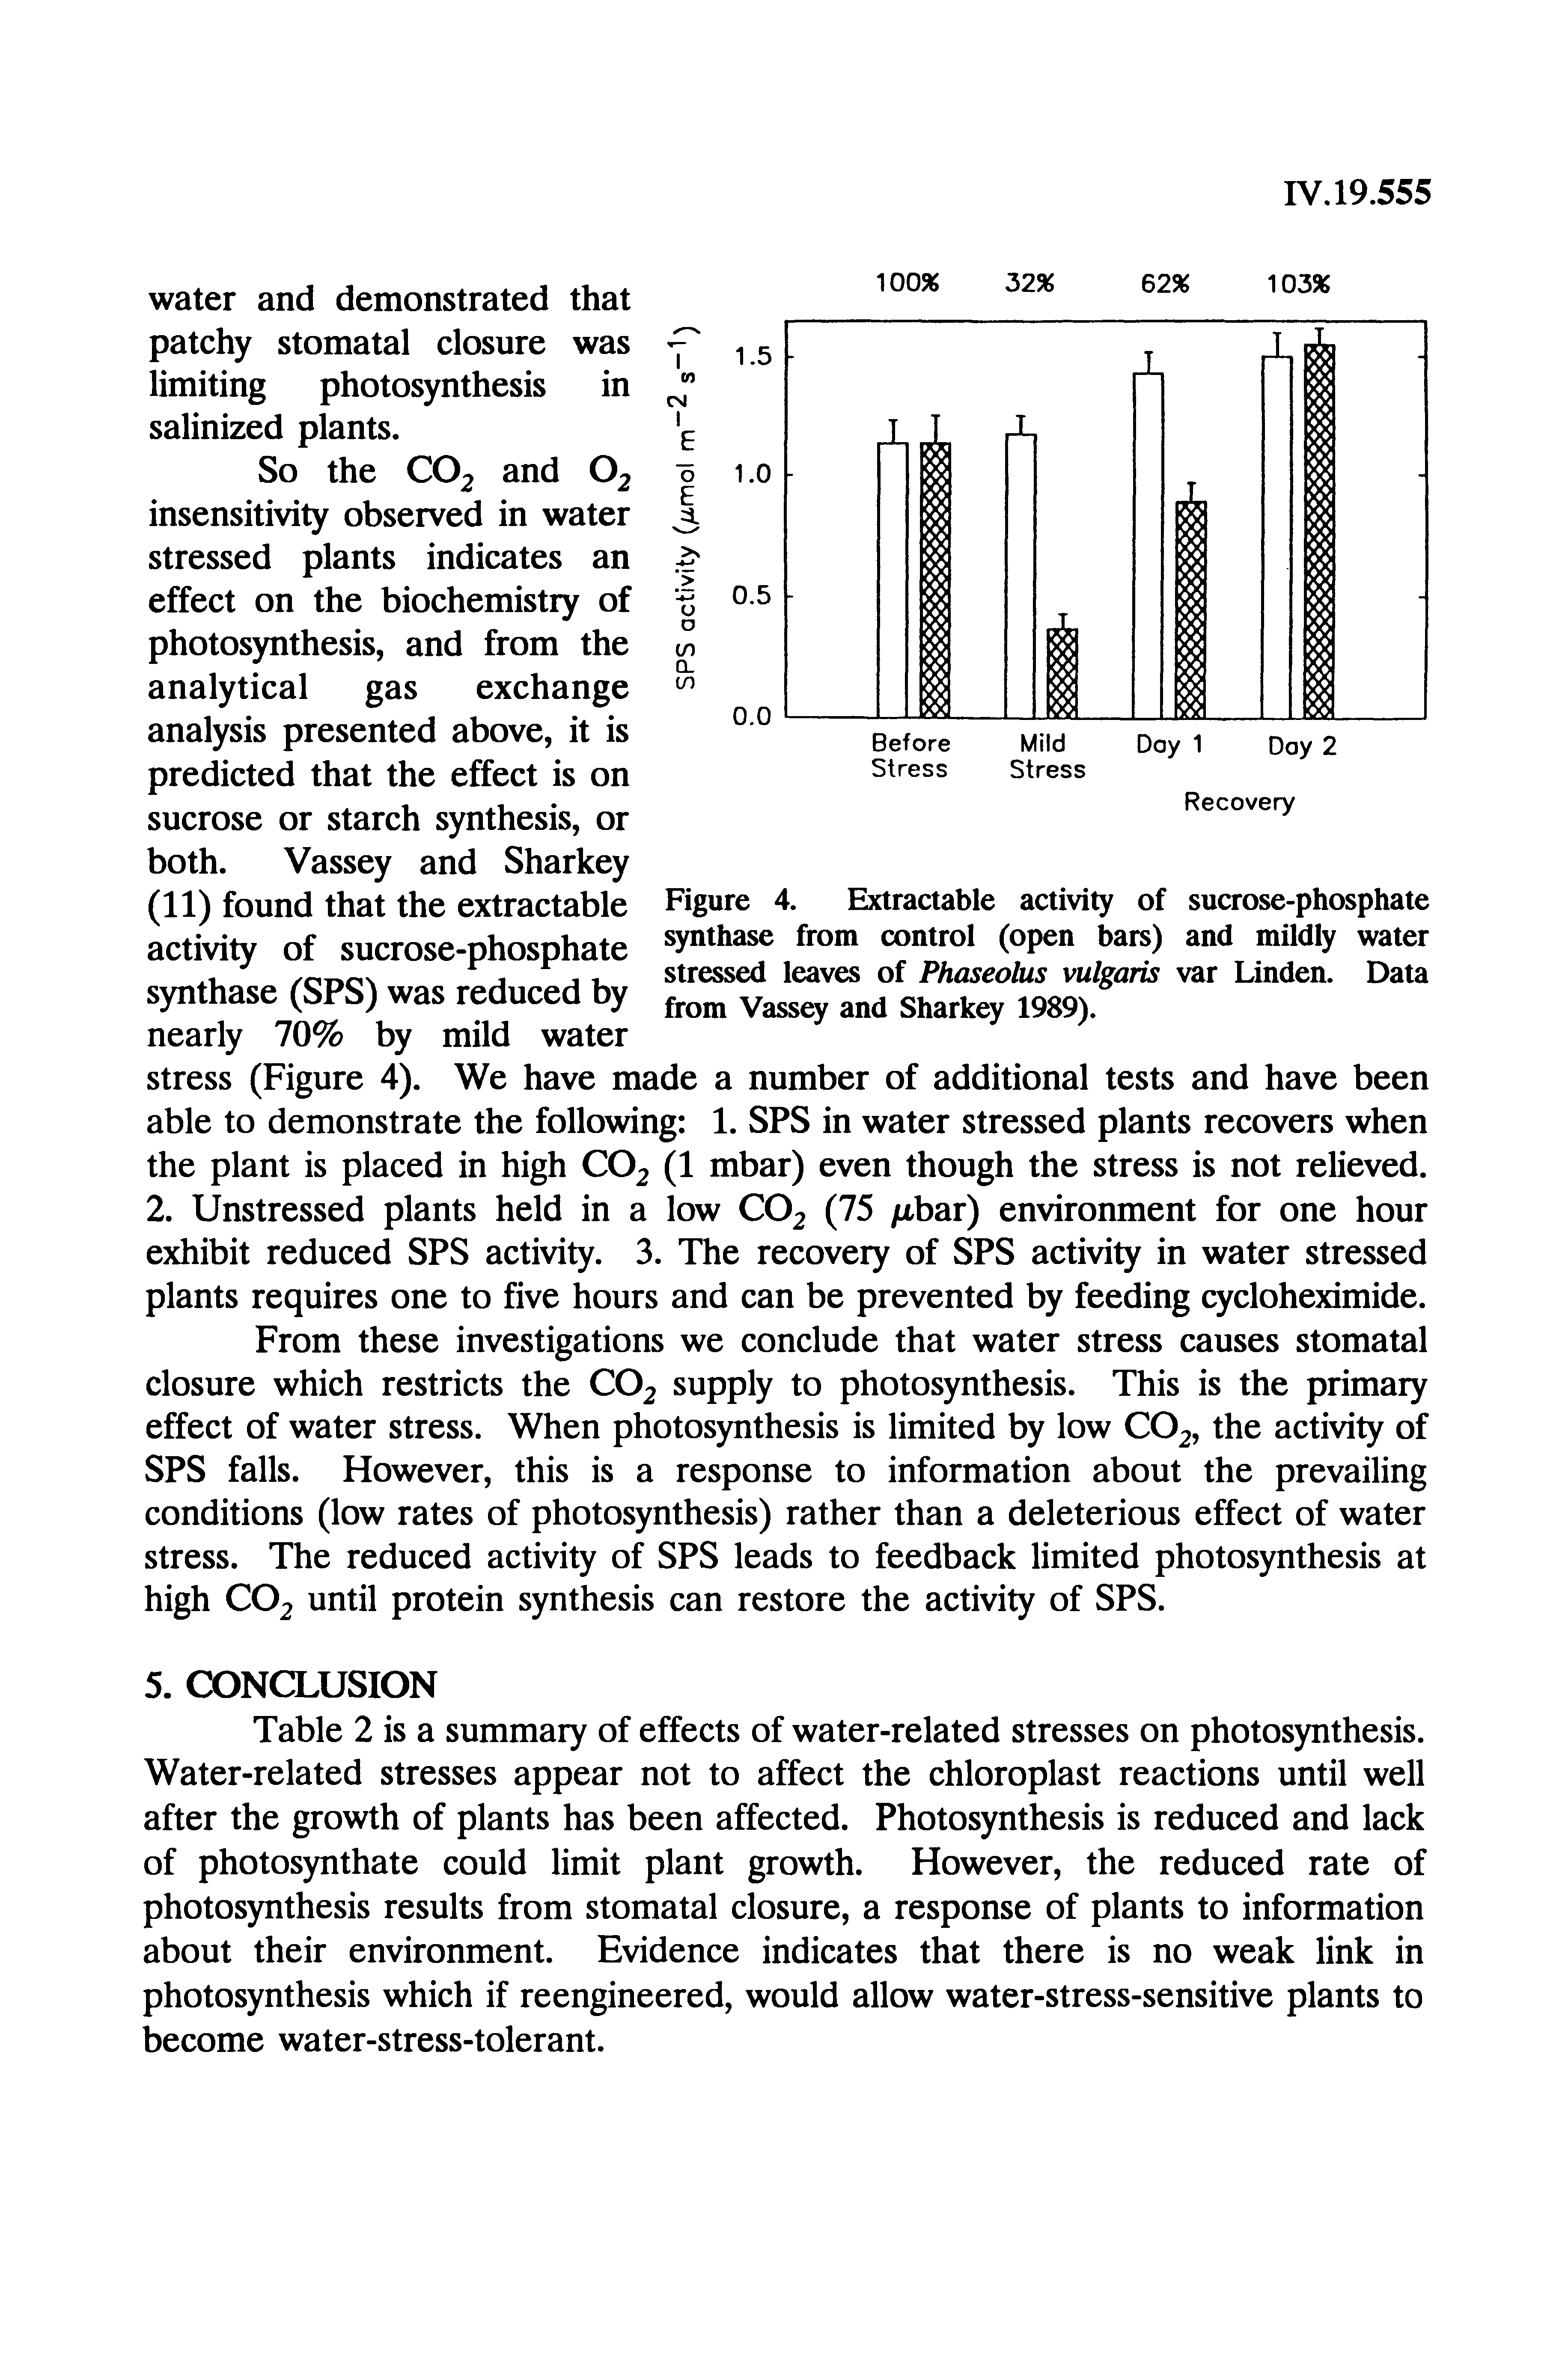 Figure 4. Extractable activity of sucrose-phosphate synthase from control (open bars) and mildly water stressed leaves of Phaseobis vulgaris var Linden. Data from Vassey and Sharkey 1989).